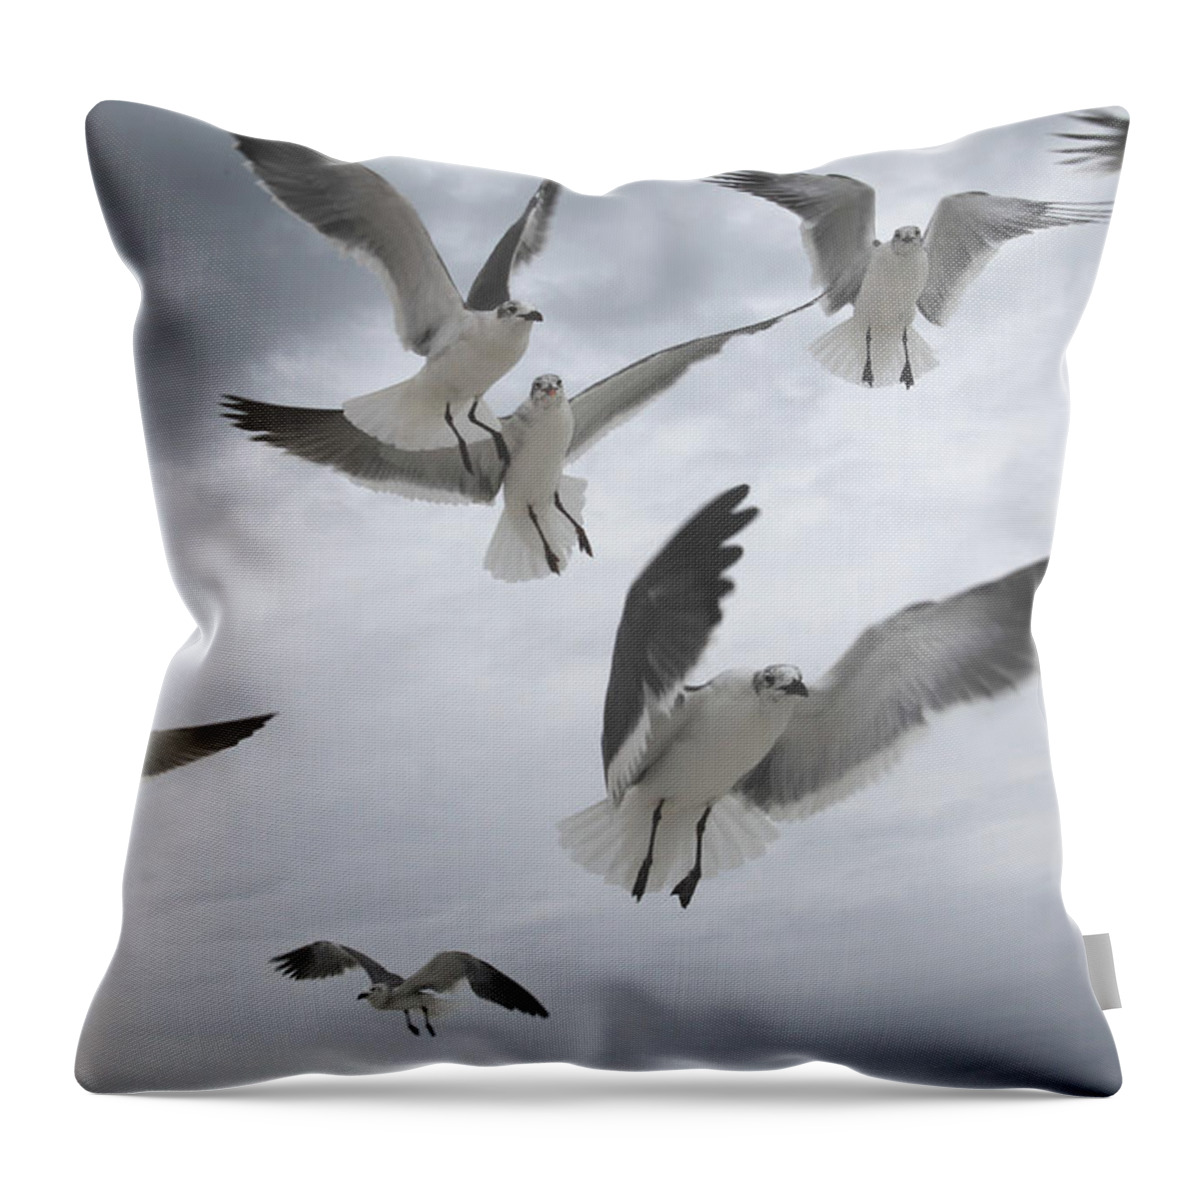 Seagull Throw Pillow featuring the photograph Sea Gull Aggression by Joseph G Holland